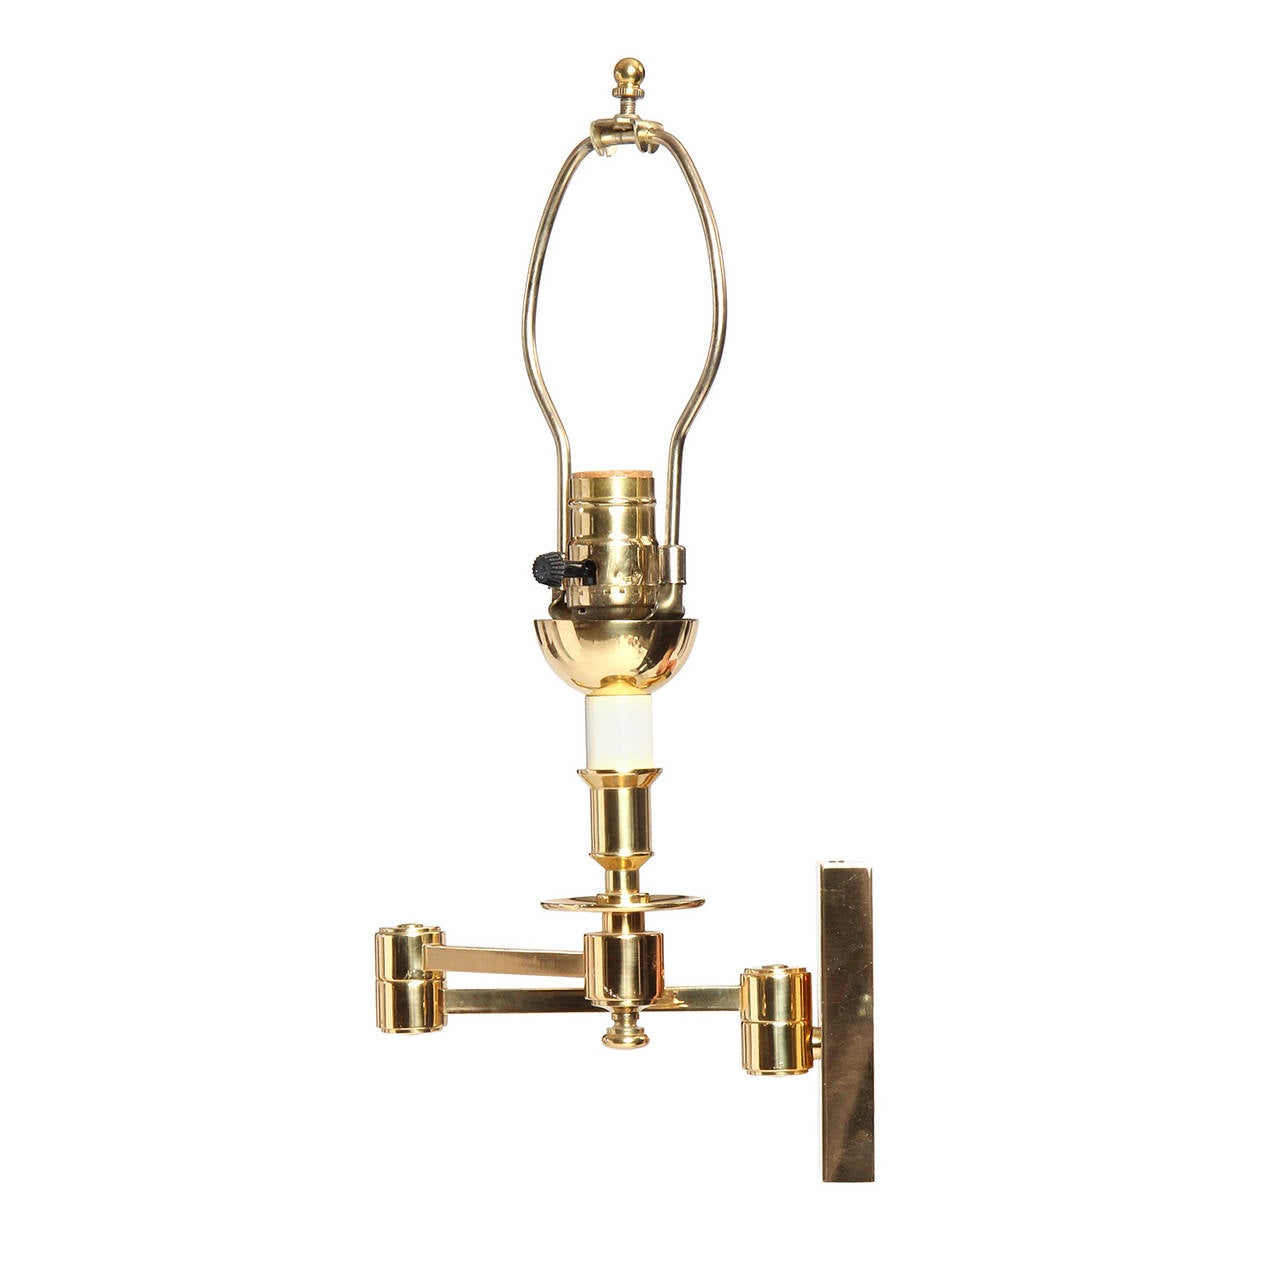 A pair of finely crafted and elegantly detailed swing arm wall sconces made of polished and lacquered brass having a geometric rectangular mounting plates.